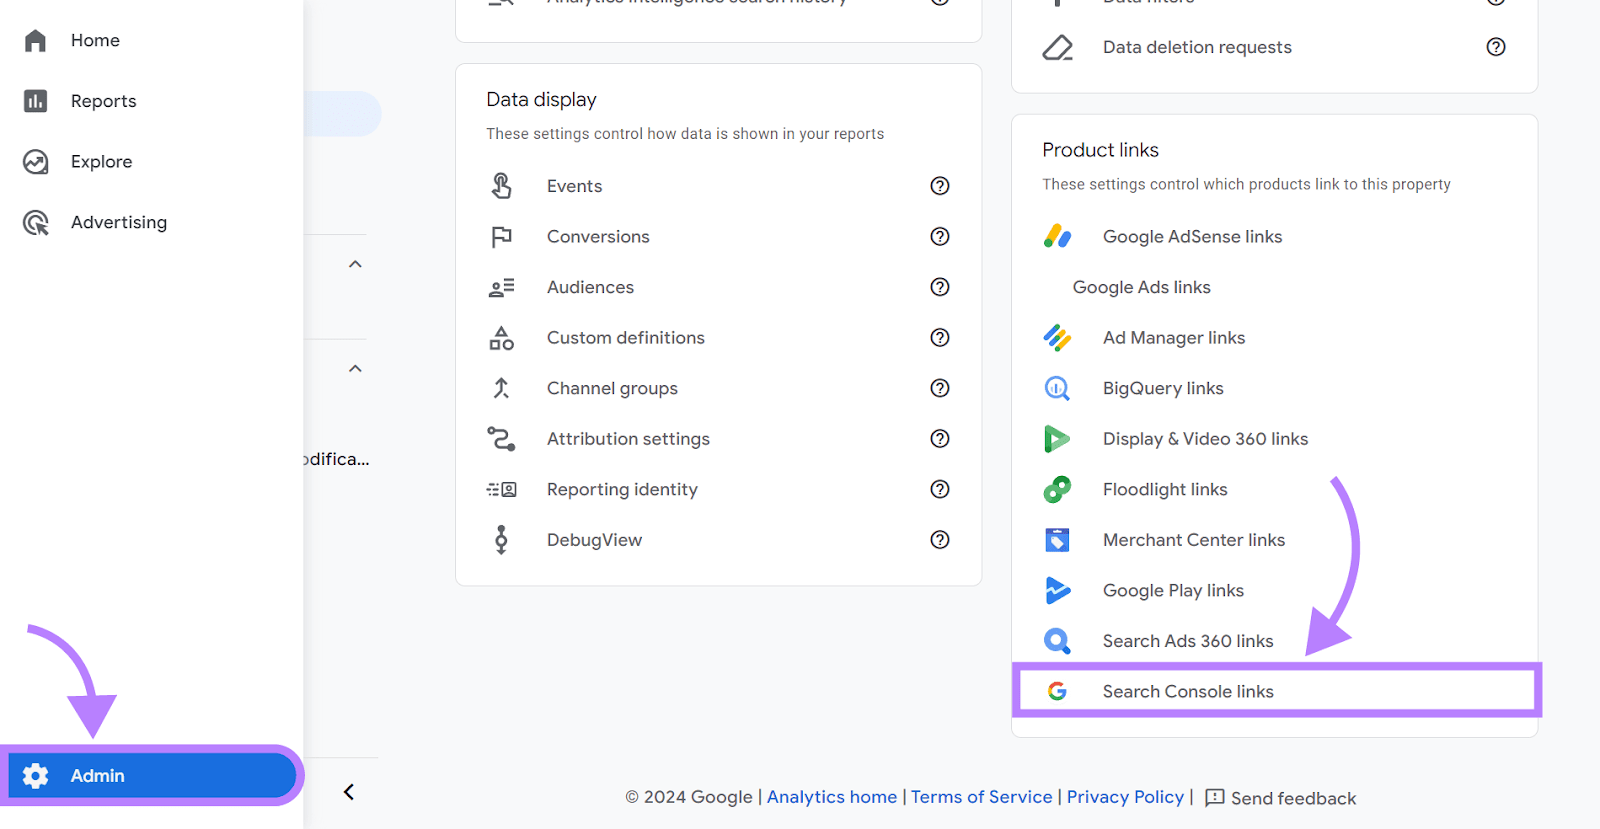 “Search Console links” selected from the admin panel